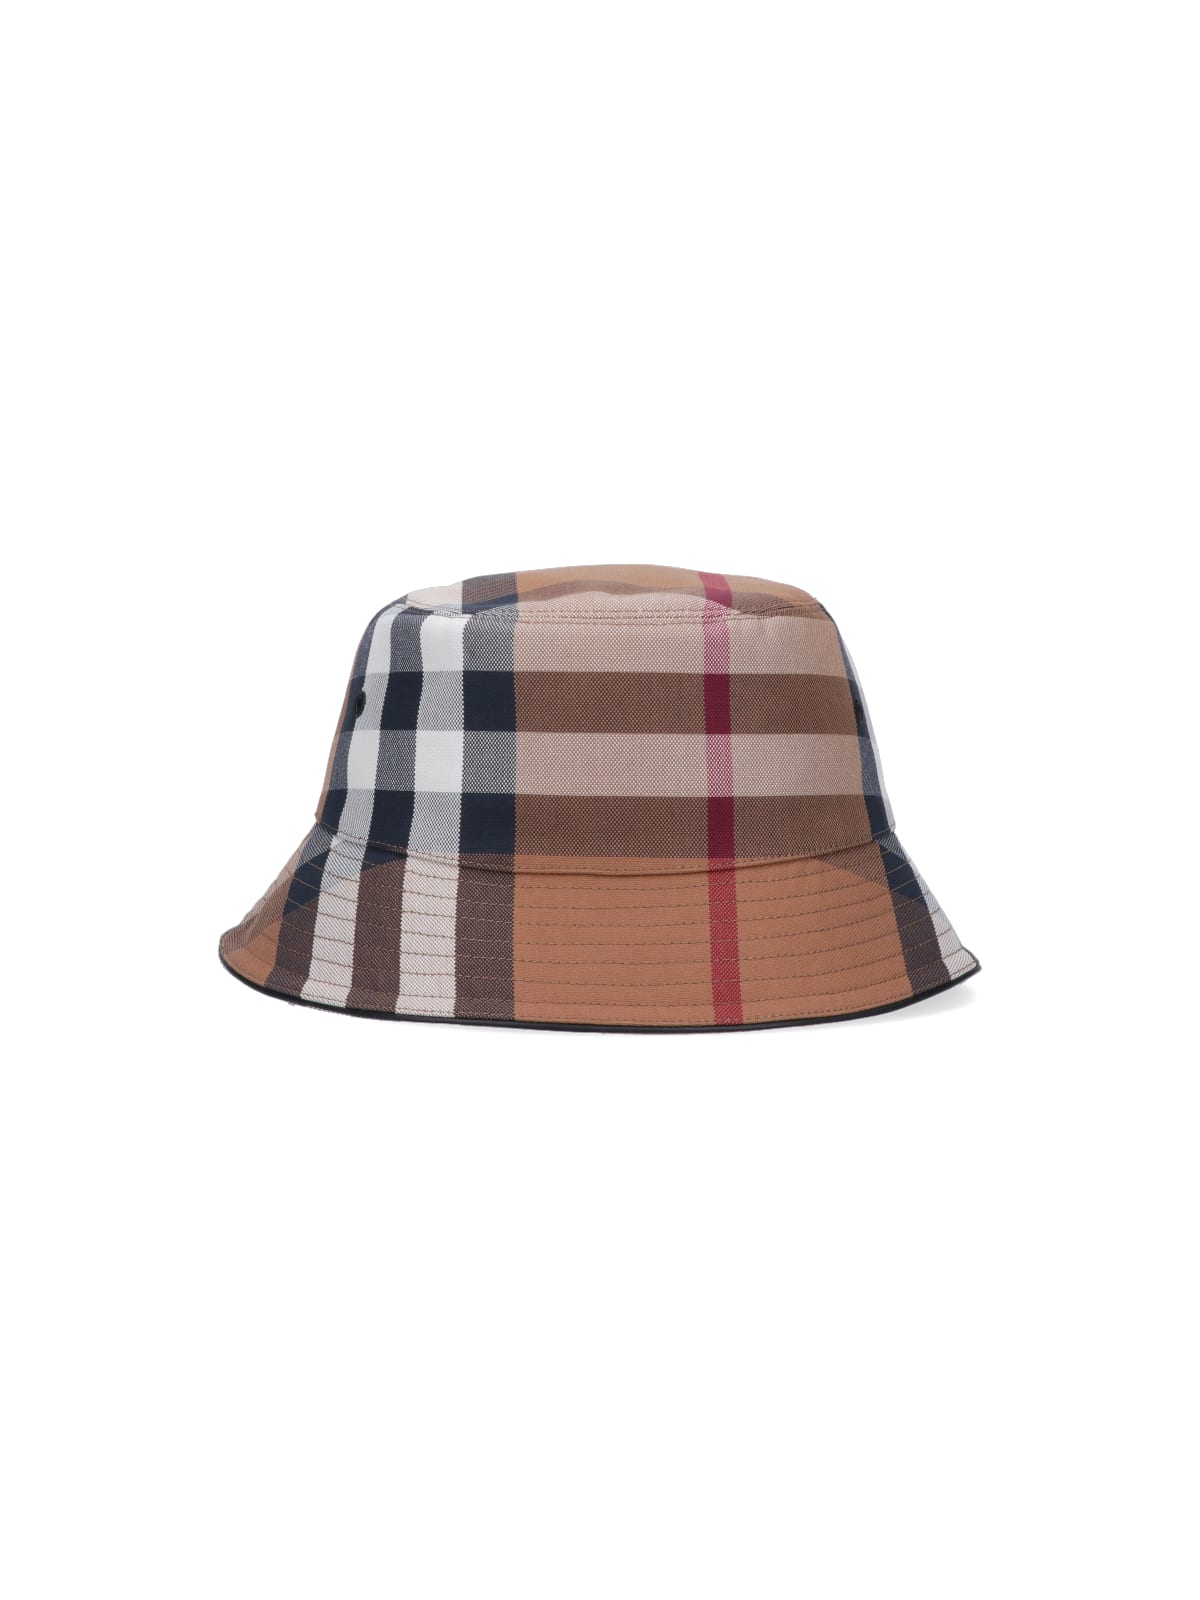 Burberry Check Bucket Hat In Brown